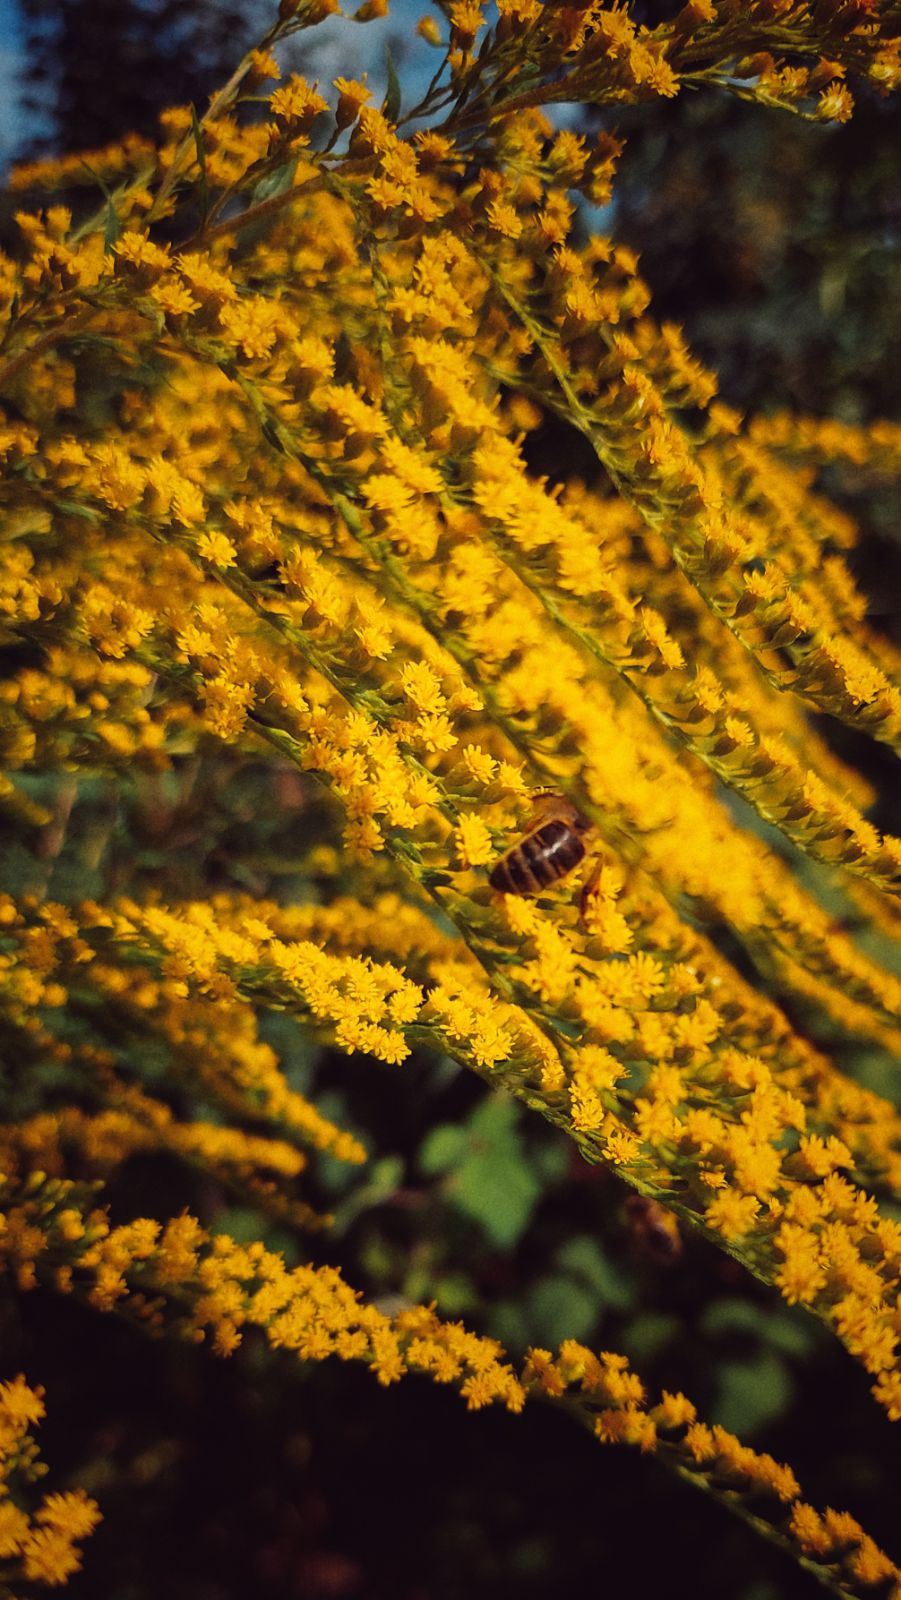 A bee in a goldenrod bush.